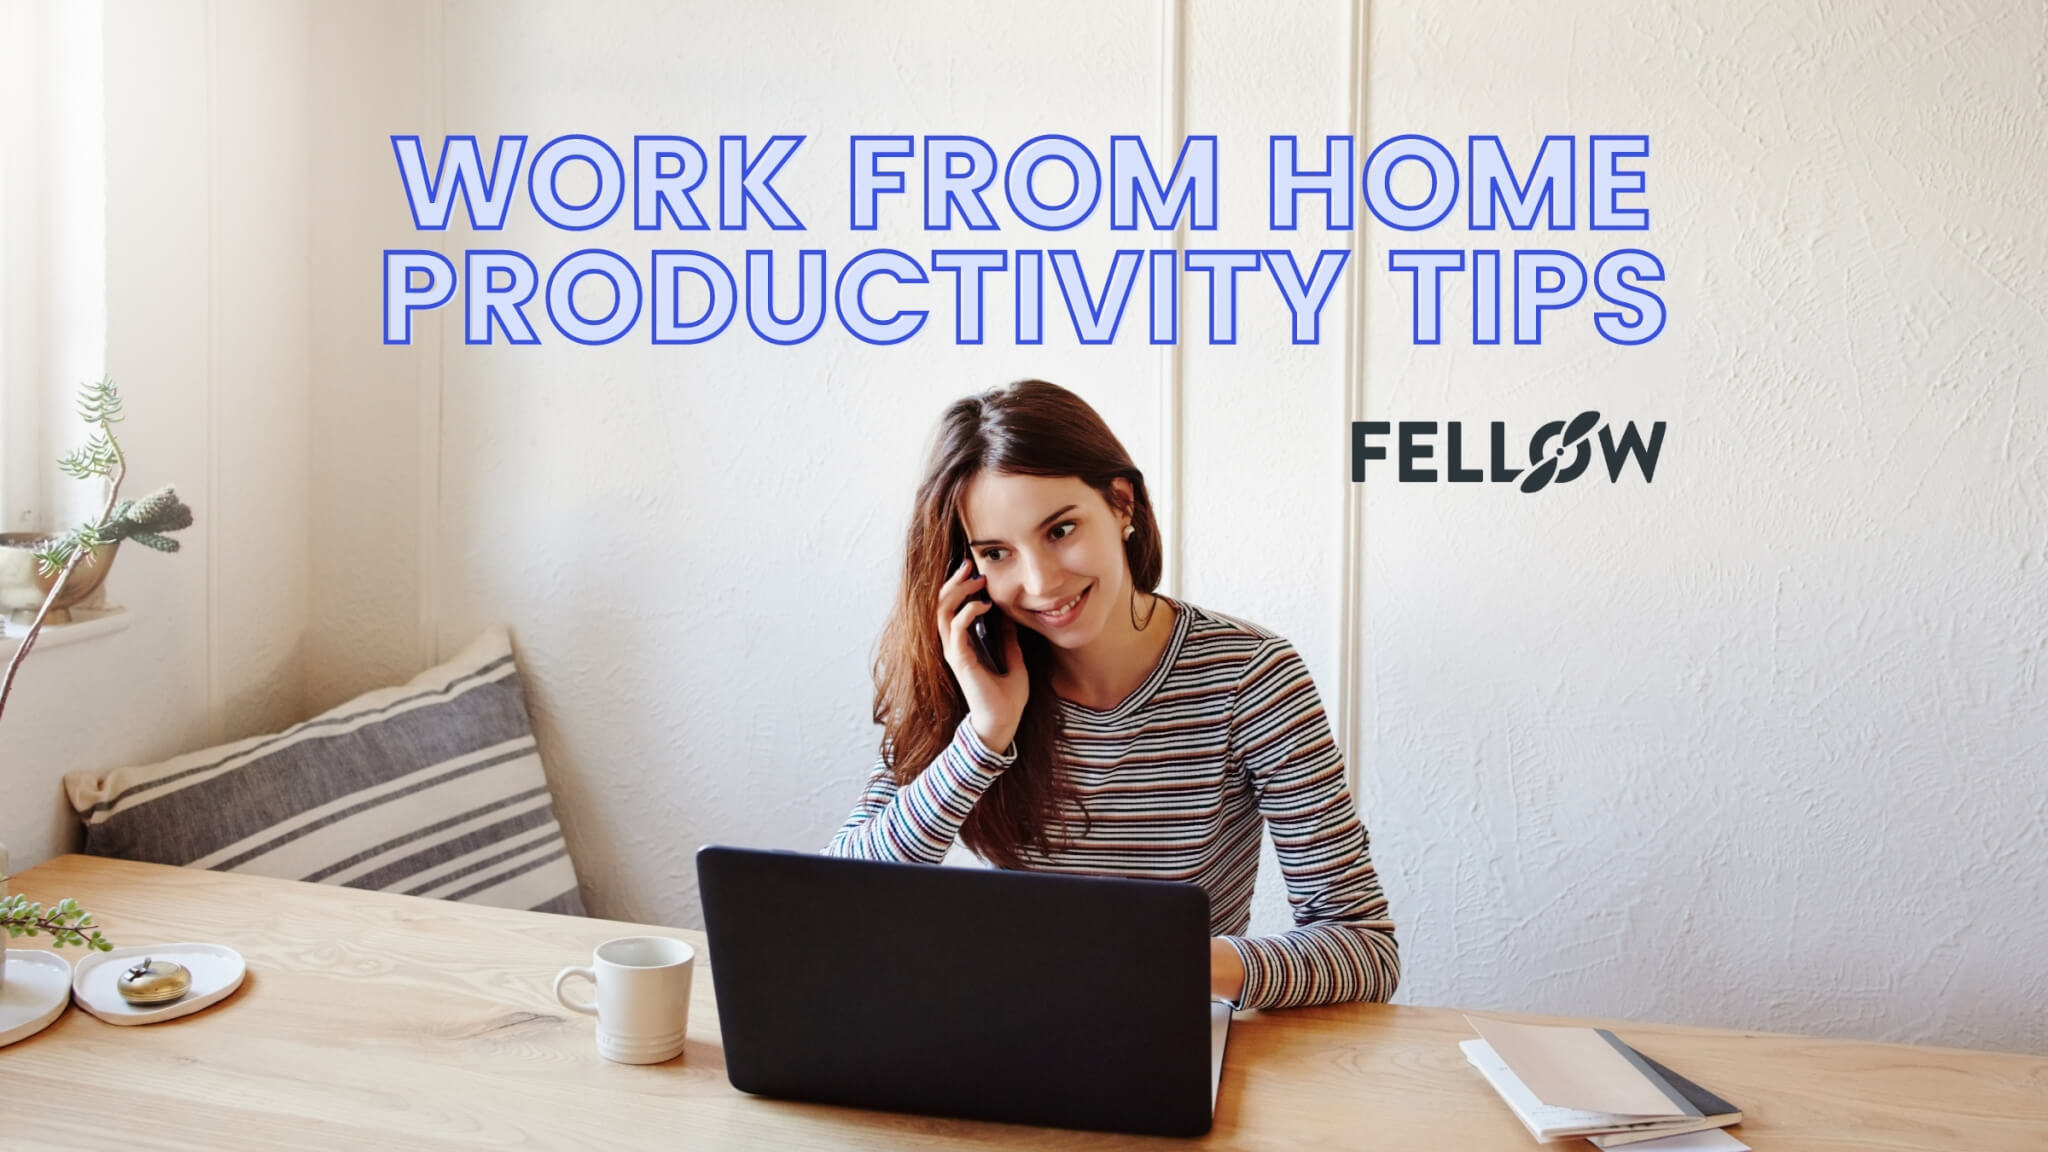 Mastering Productivity: 10 Essential Tips for Working from Home - Conclusion